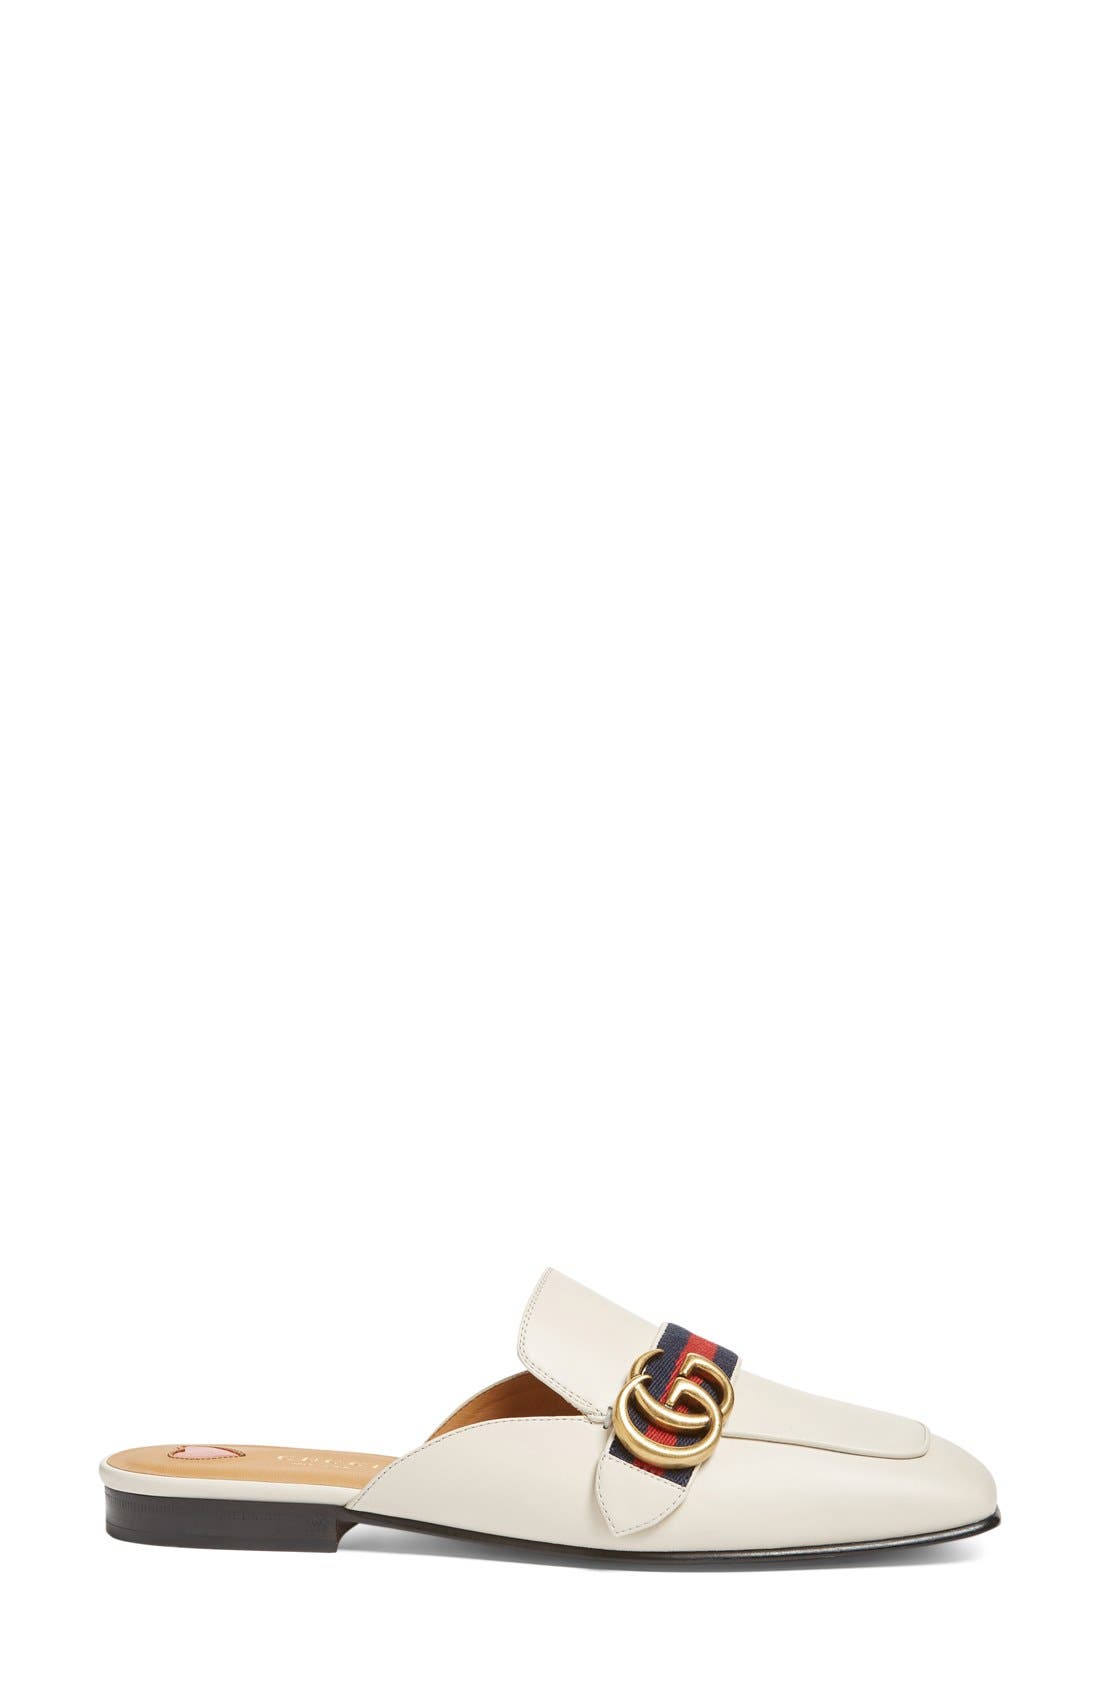 GUCCI 10Mm Peyton Gg Leather Mules, Off White | ModeSens